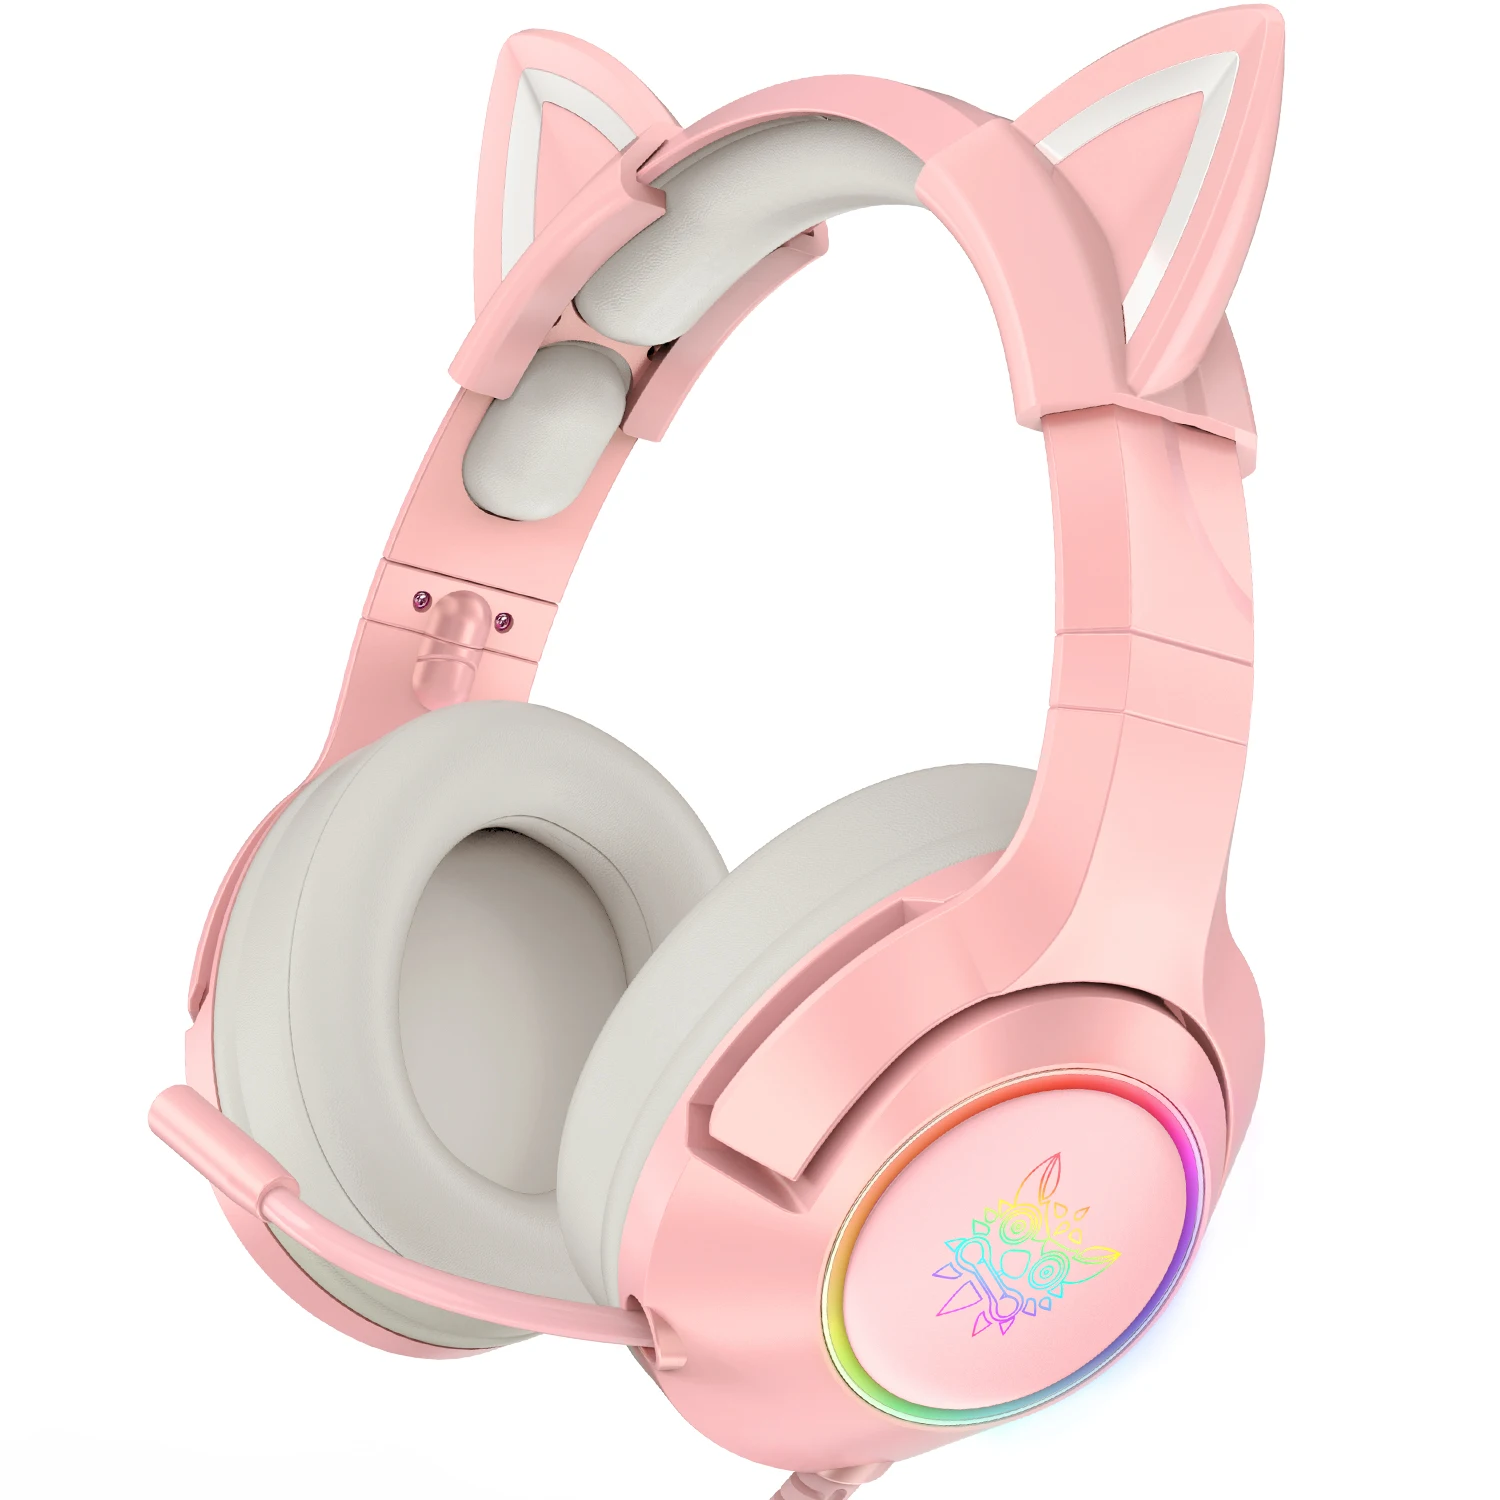 

ONIKUMA K9 Pink Gaming Headset For Girls PC Stereo Gaming Headphones with Mic & LED Light For Laptop/ PS4/Xbox One Controller